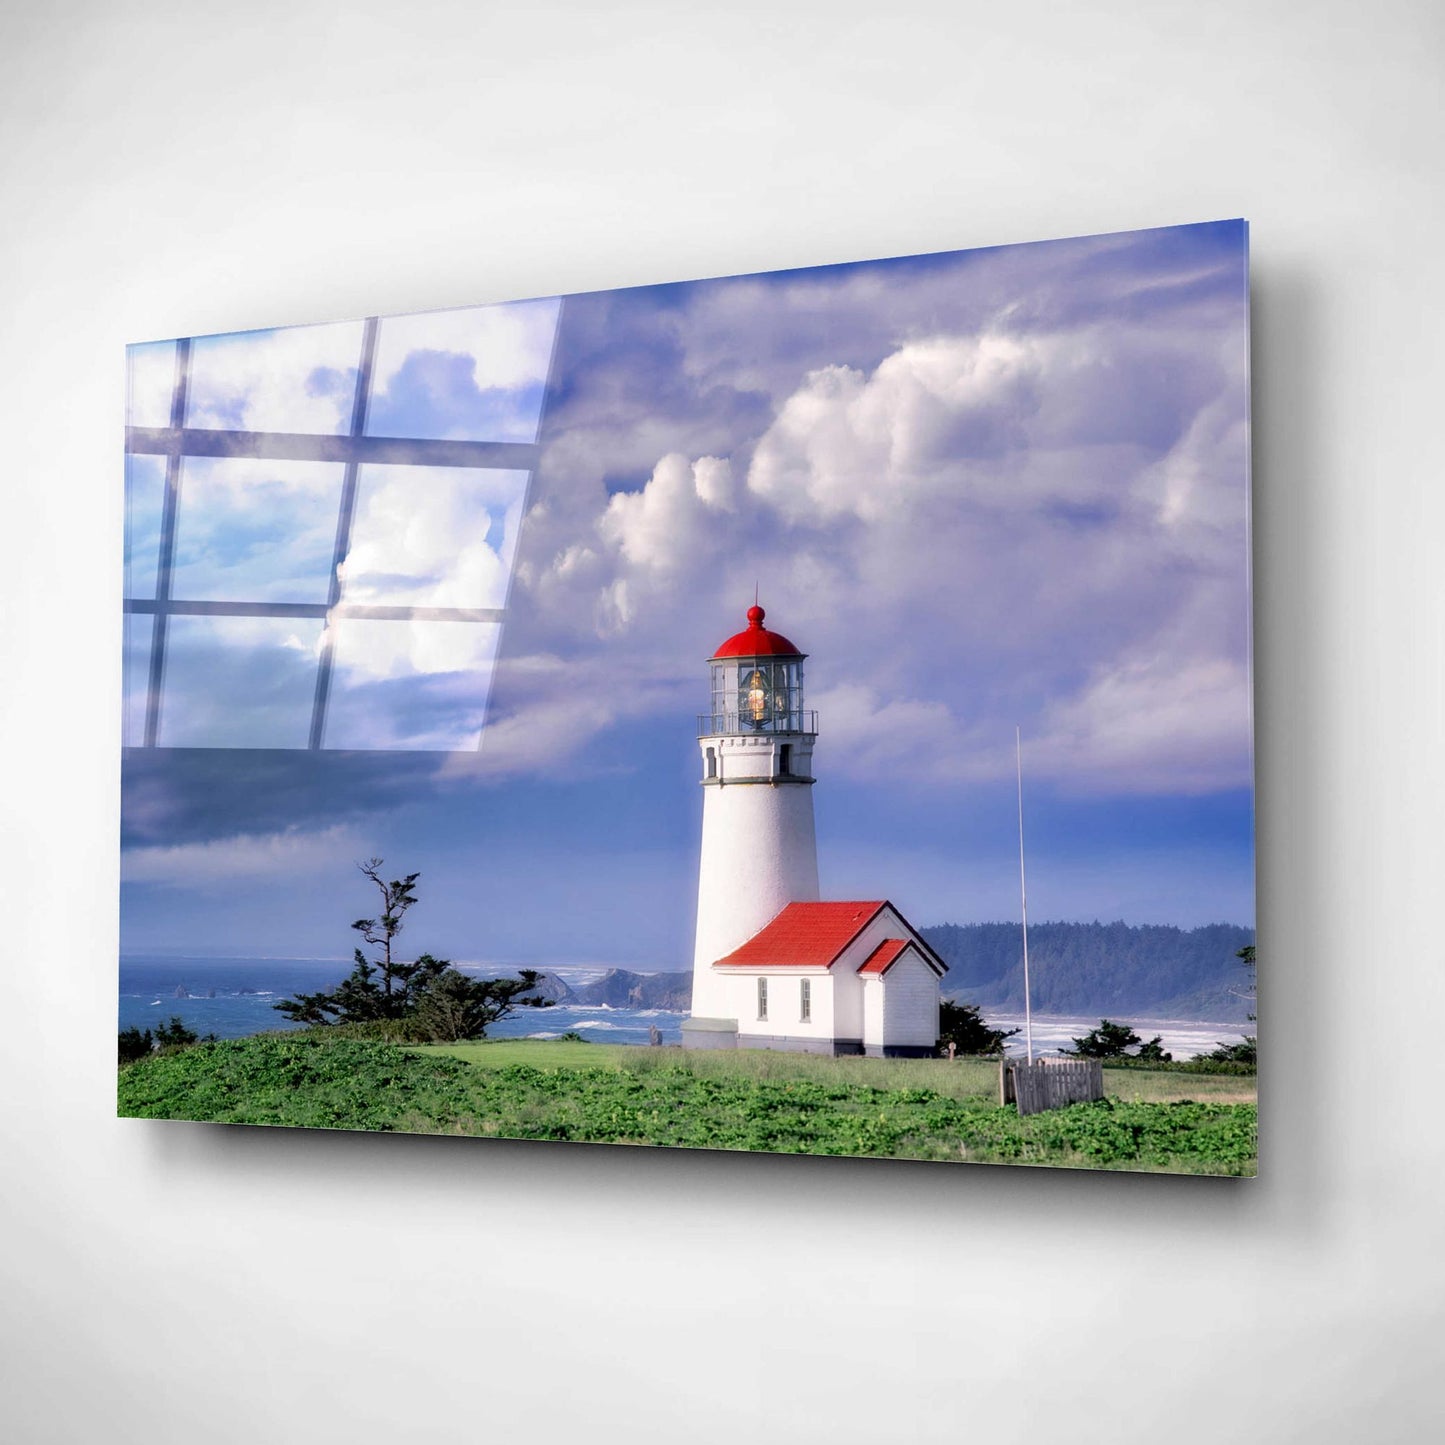 Epic Art 'Red Roof Lighthouse' by Dennis Frates, Acrylic Glass Wall Art,24x16